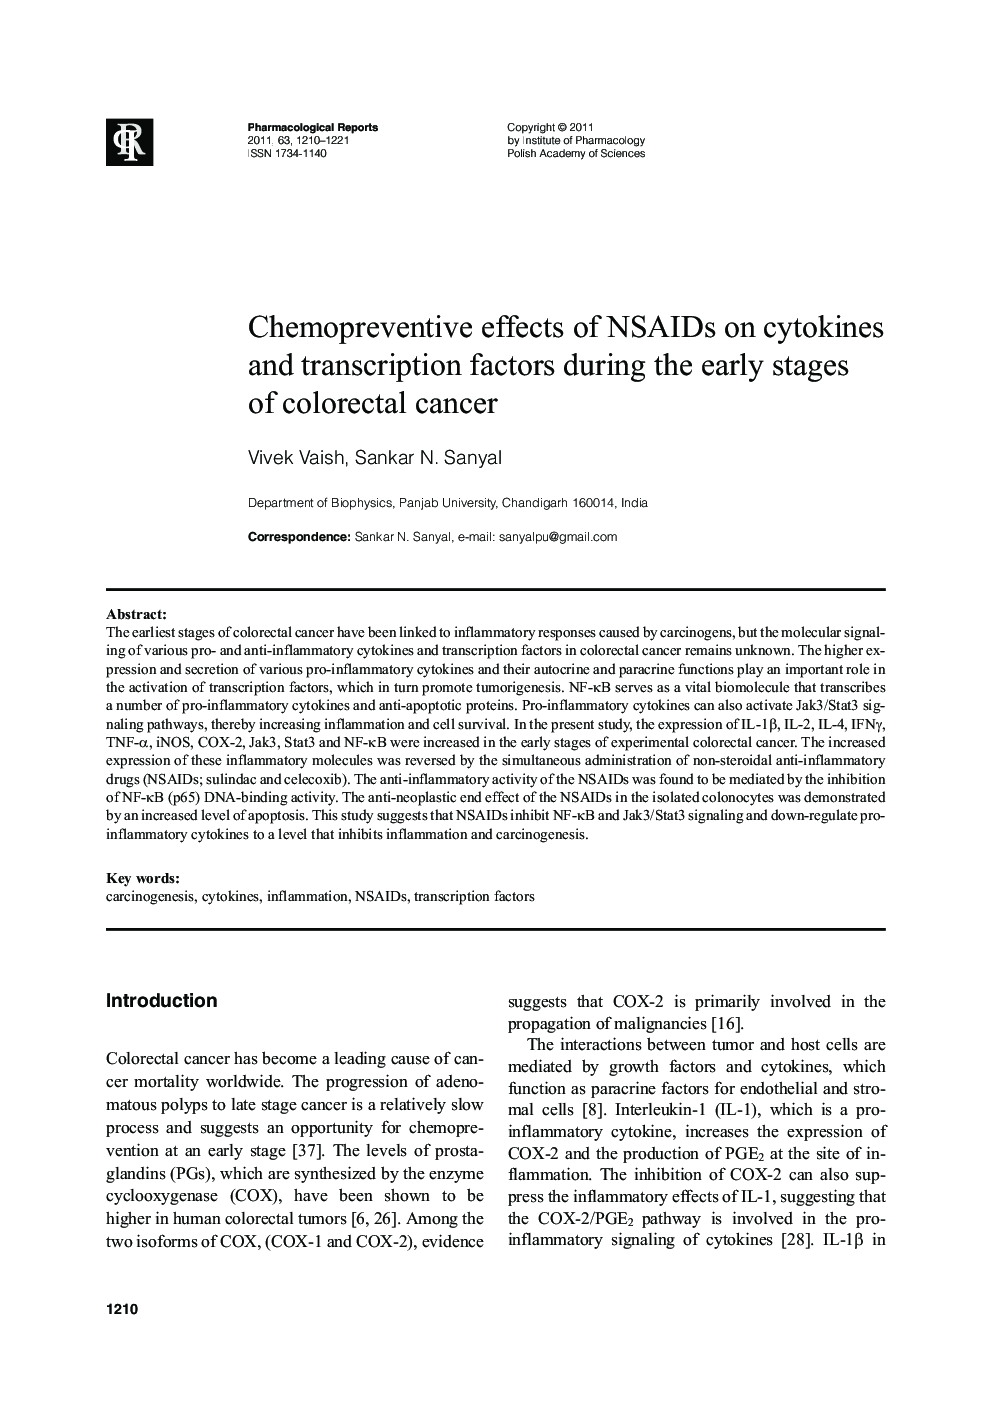 Chemopreventive effects of NSAIDs on cytokines and transcription factors during the early stages of colorectal cancer